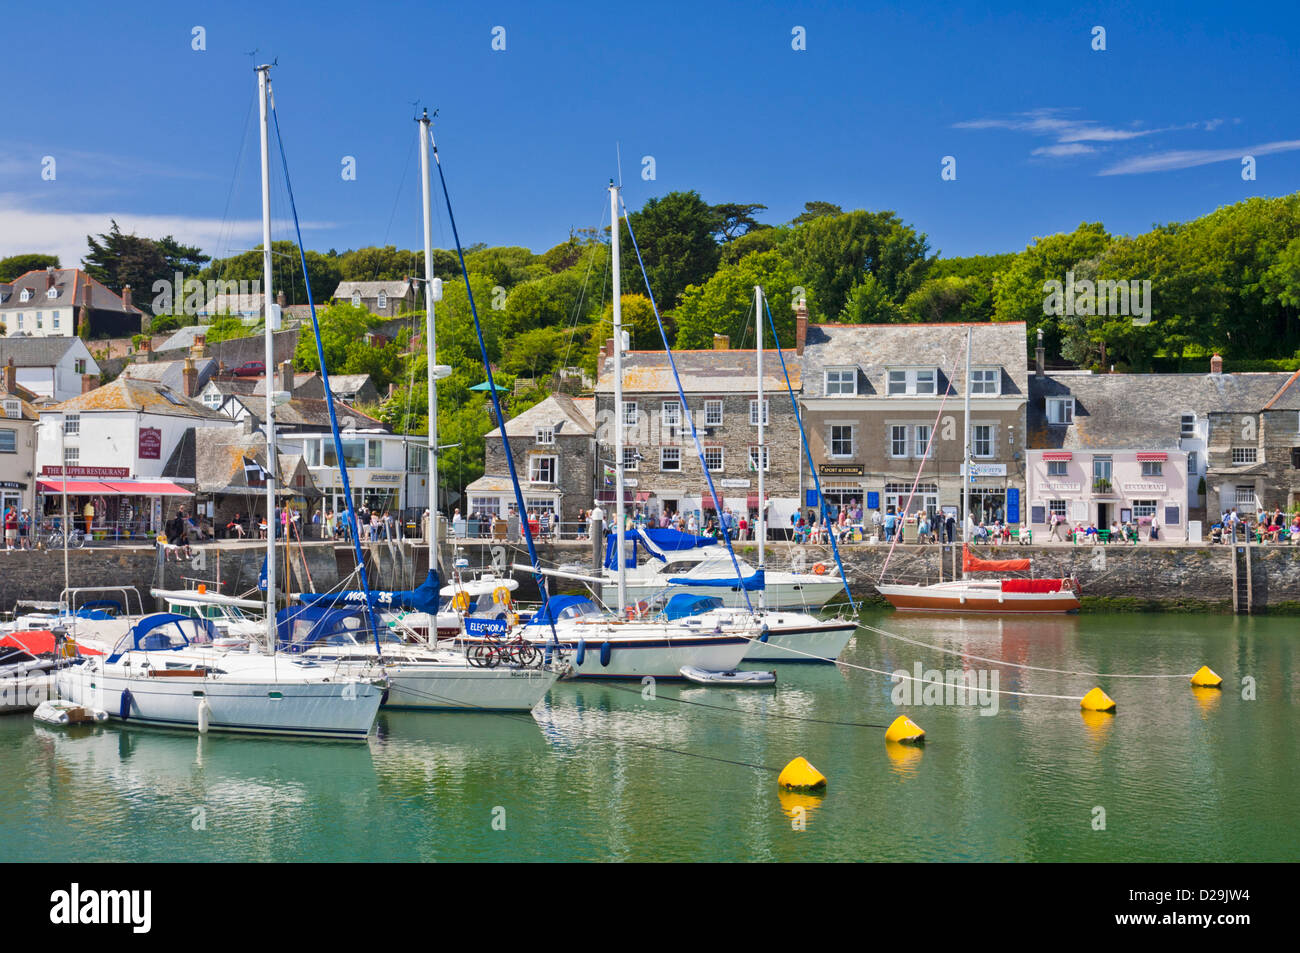 Padstow Harbour  Padstow Cornwall Boats moored in the harbour, Padstow, Cornwall, England, GB, UK,  Europe Stock Photo